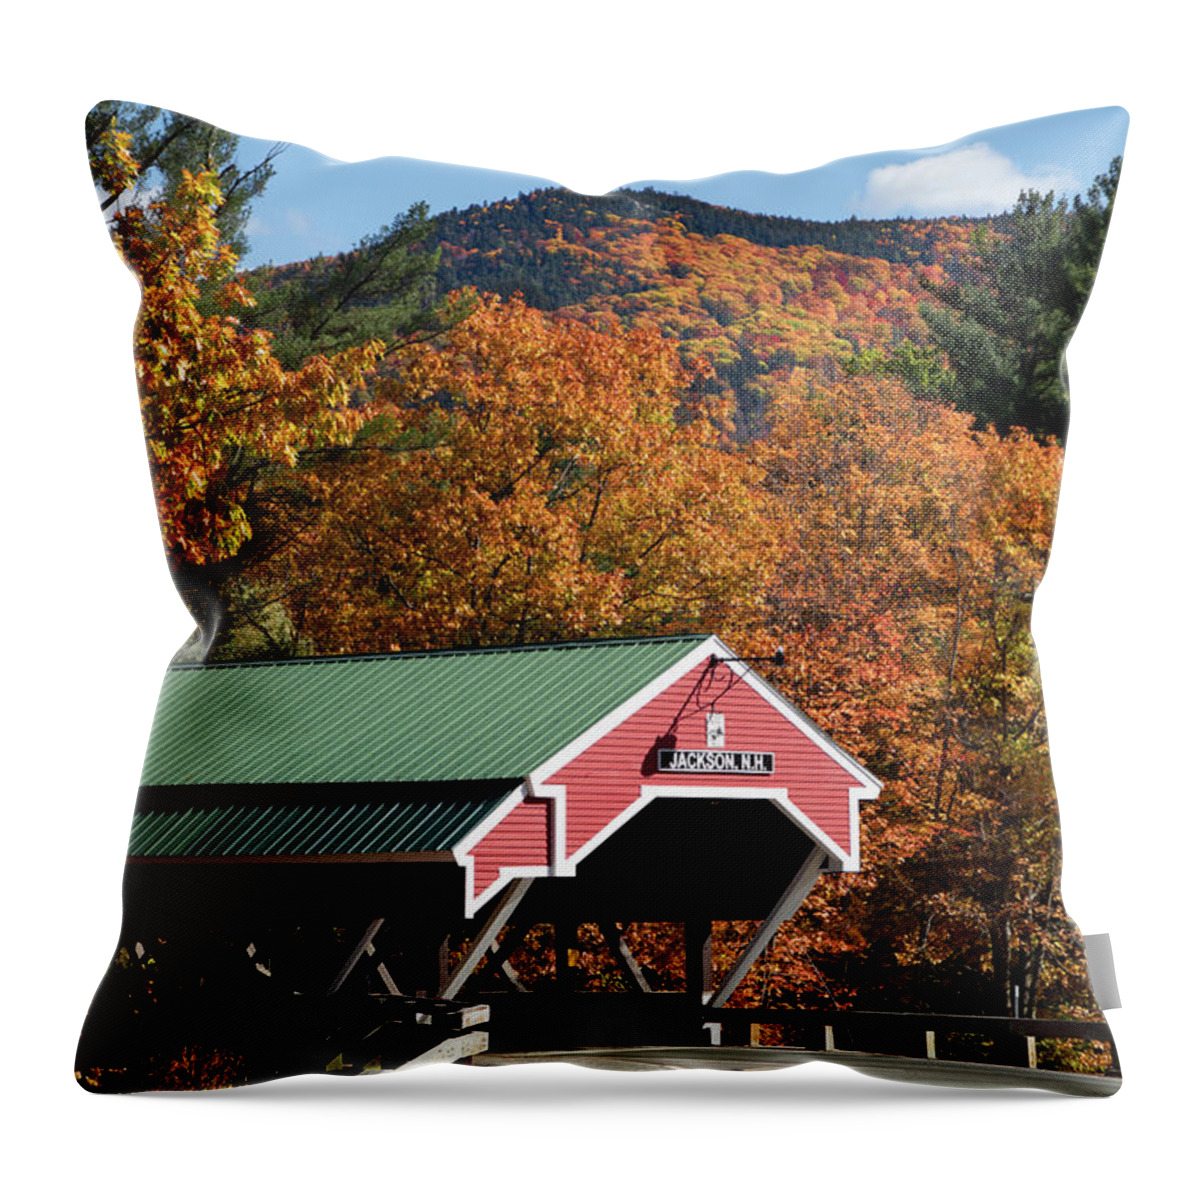 Jackson Nh Throw Pillow featuring the photograph Peak fall colors over the Jackson Covered Bridge by Jeff Folger